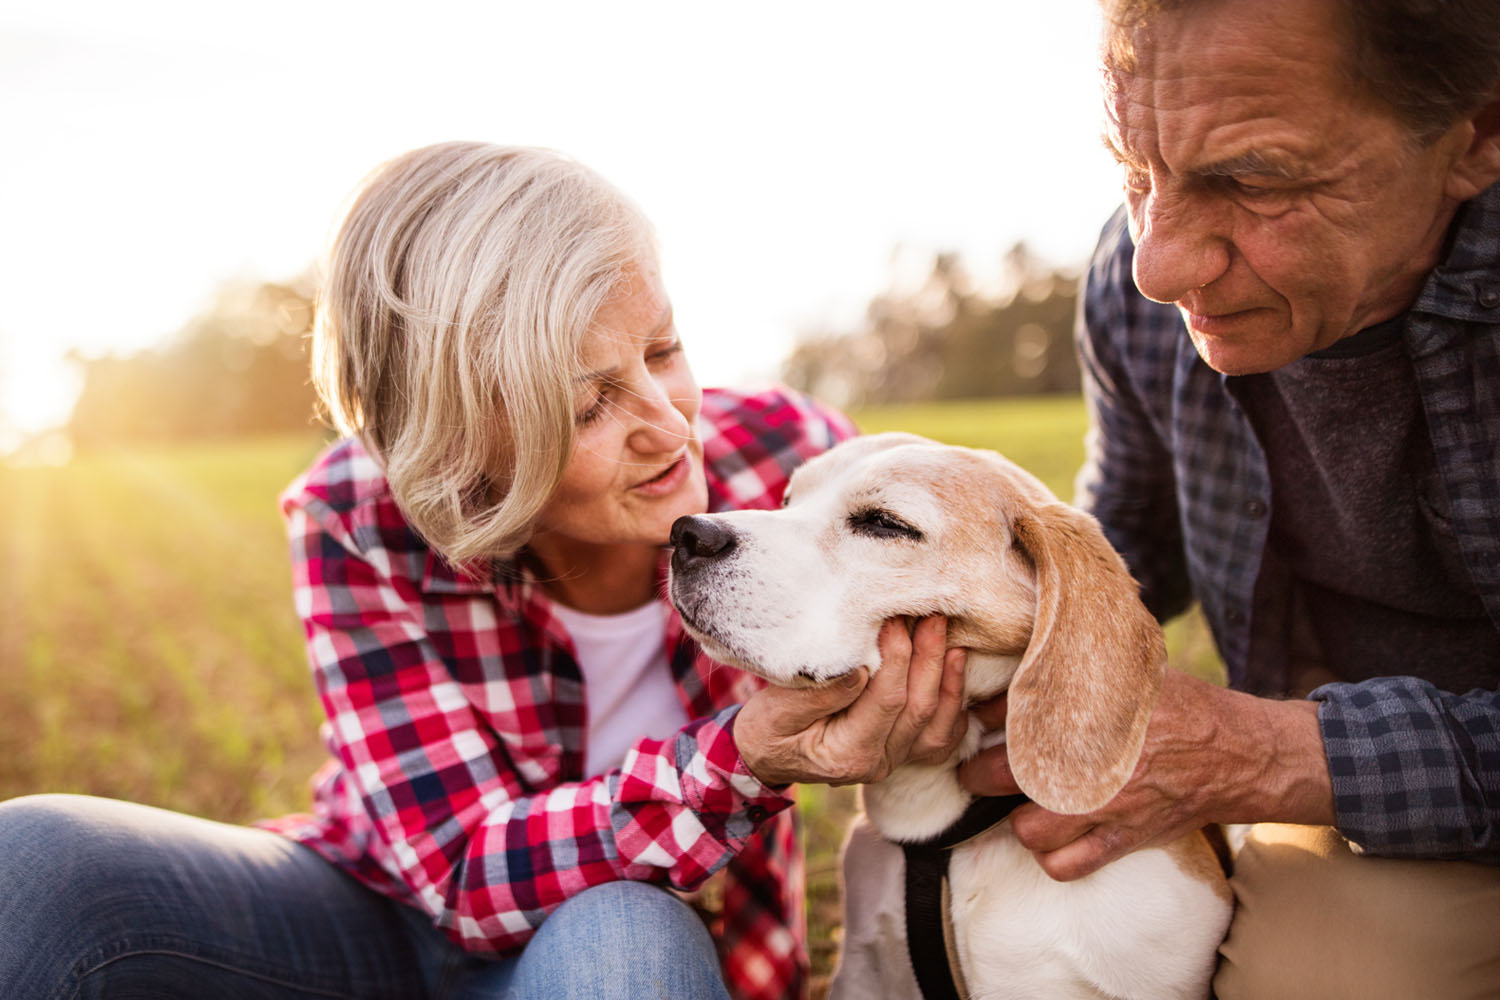 Cardiology photo with couple playing with dog